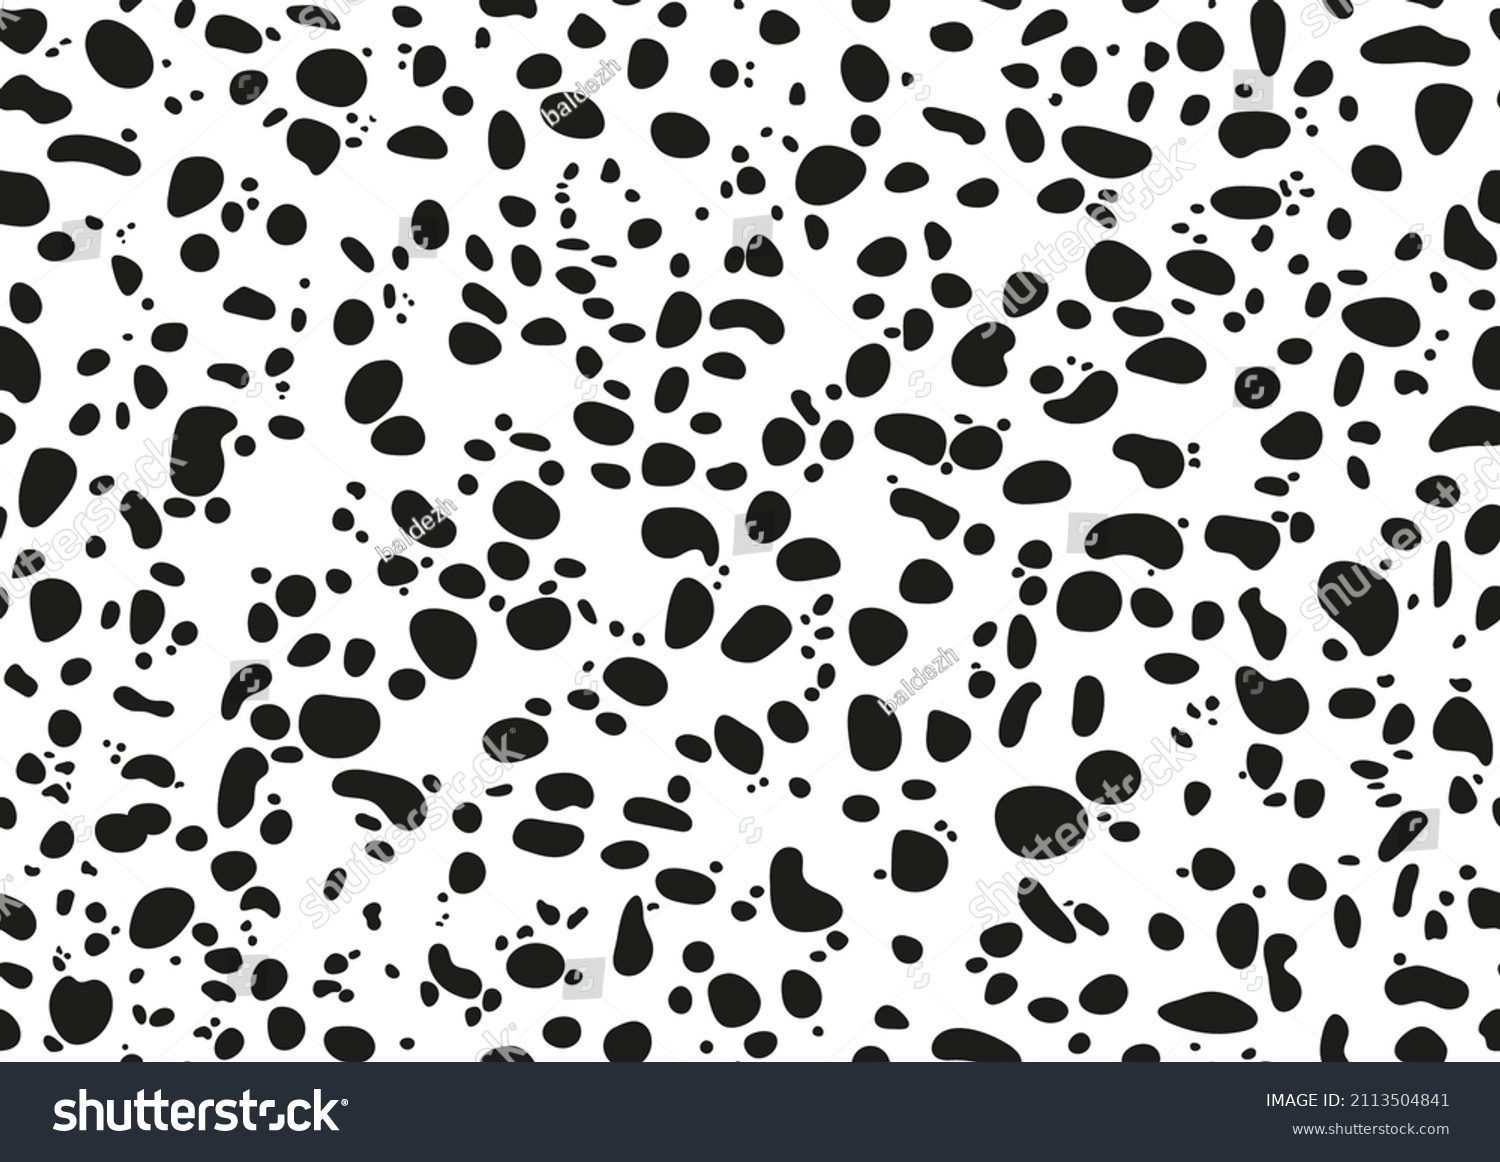 SVG of Dalmatian seamless pattern, animal print with spot texture on skin. Absract design and shapes dog or cow black spots on white background for fibres and textile. Simple endless leather backdrop. svg